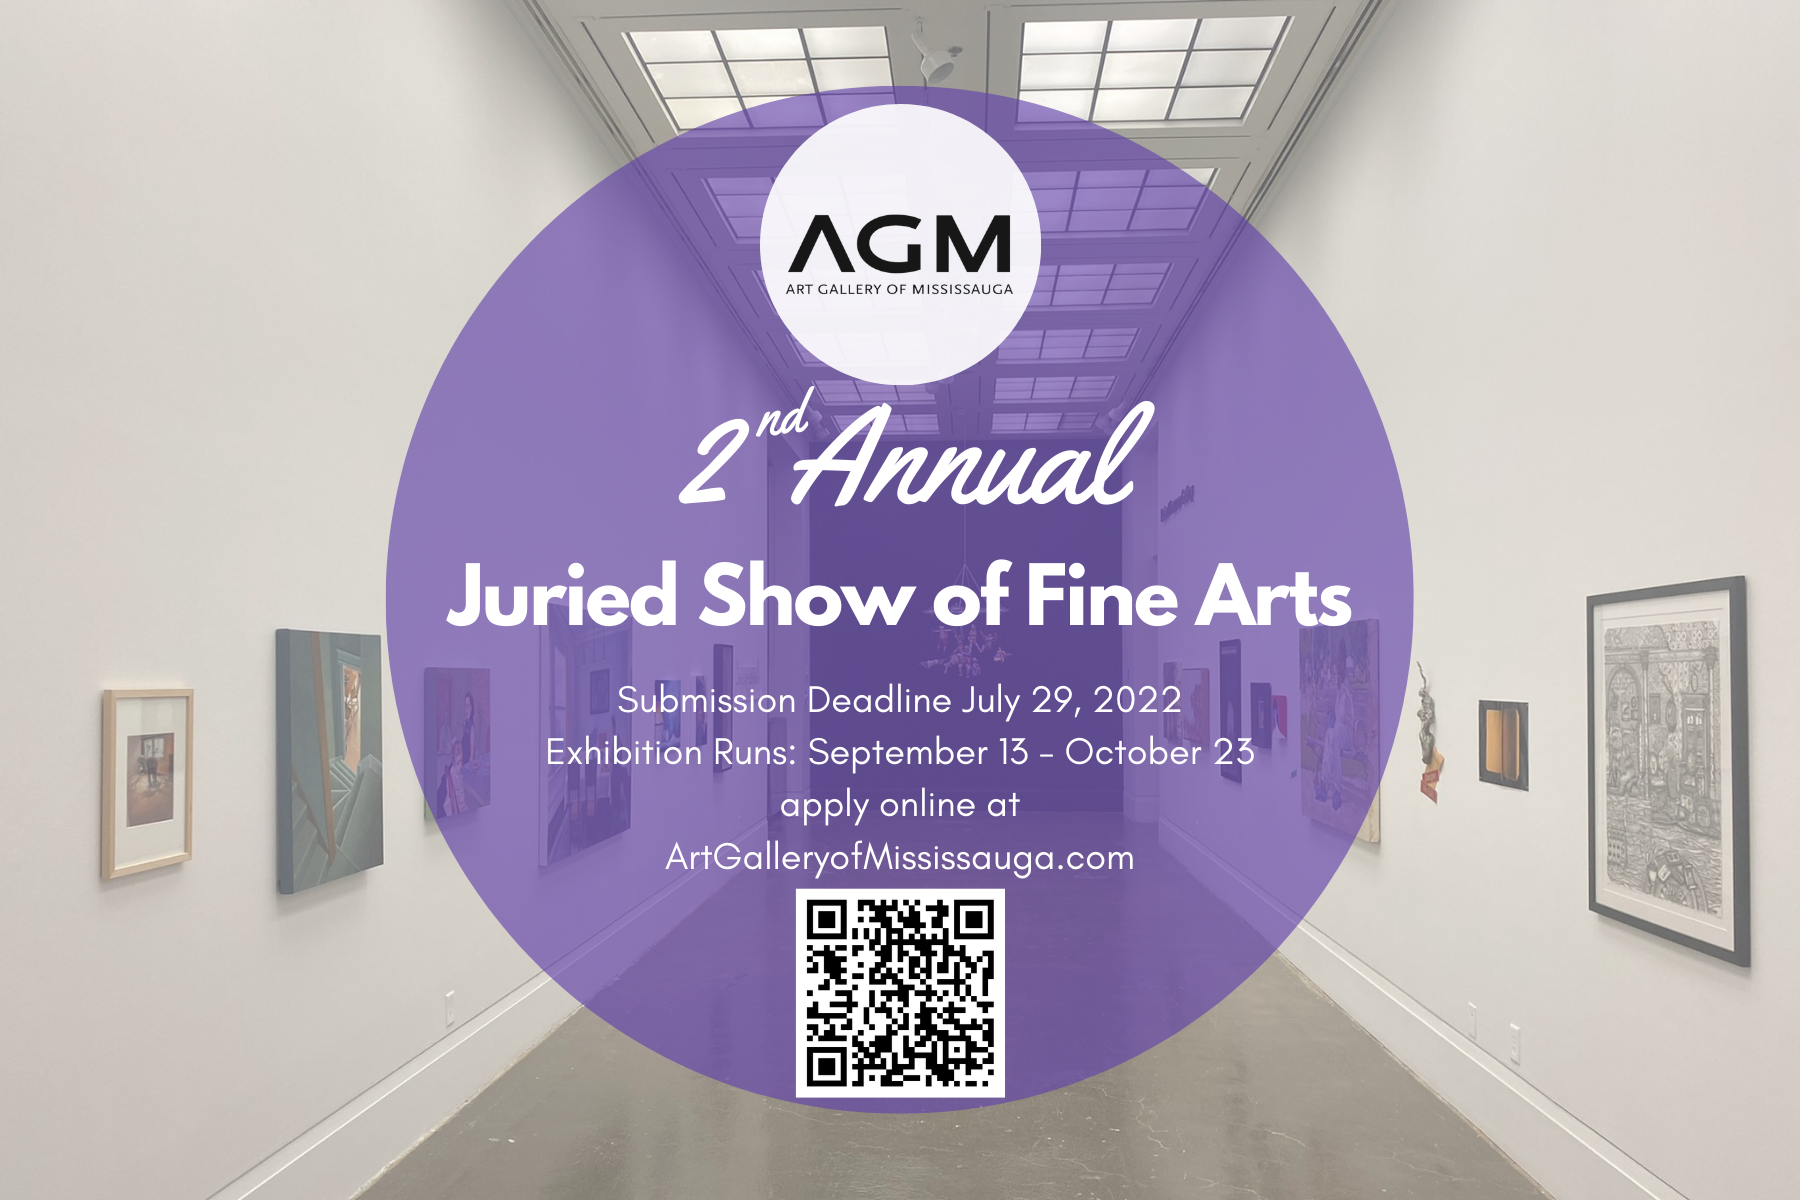 CALL FOR SUBMISSIONS: AGM Second Annual Juried Show of Fine Arts